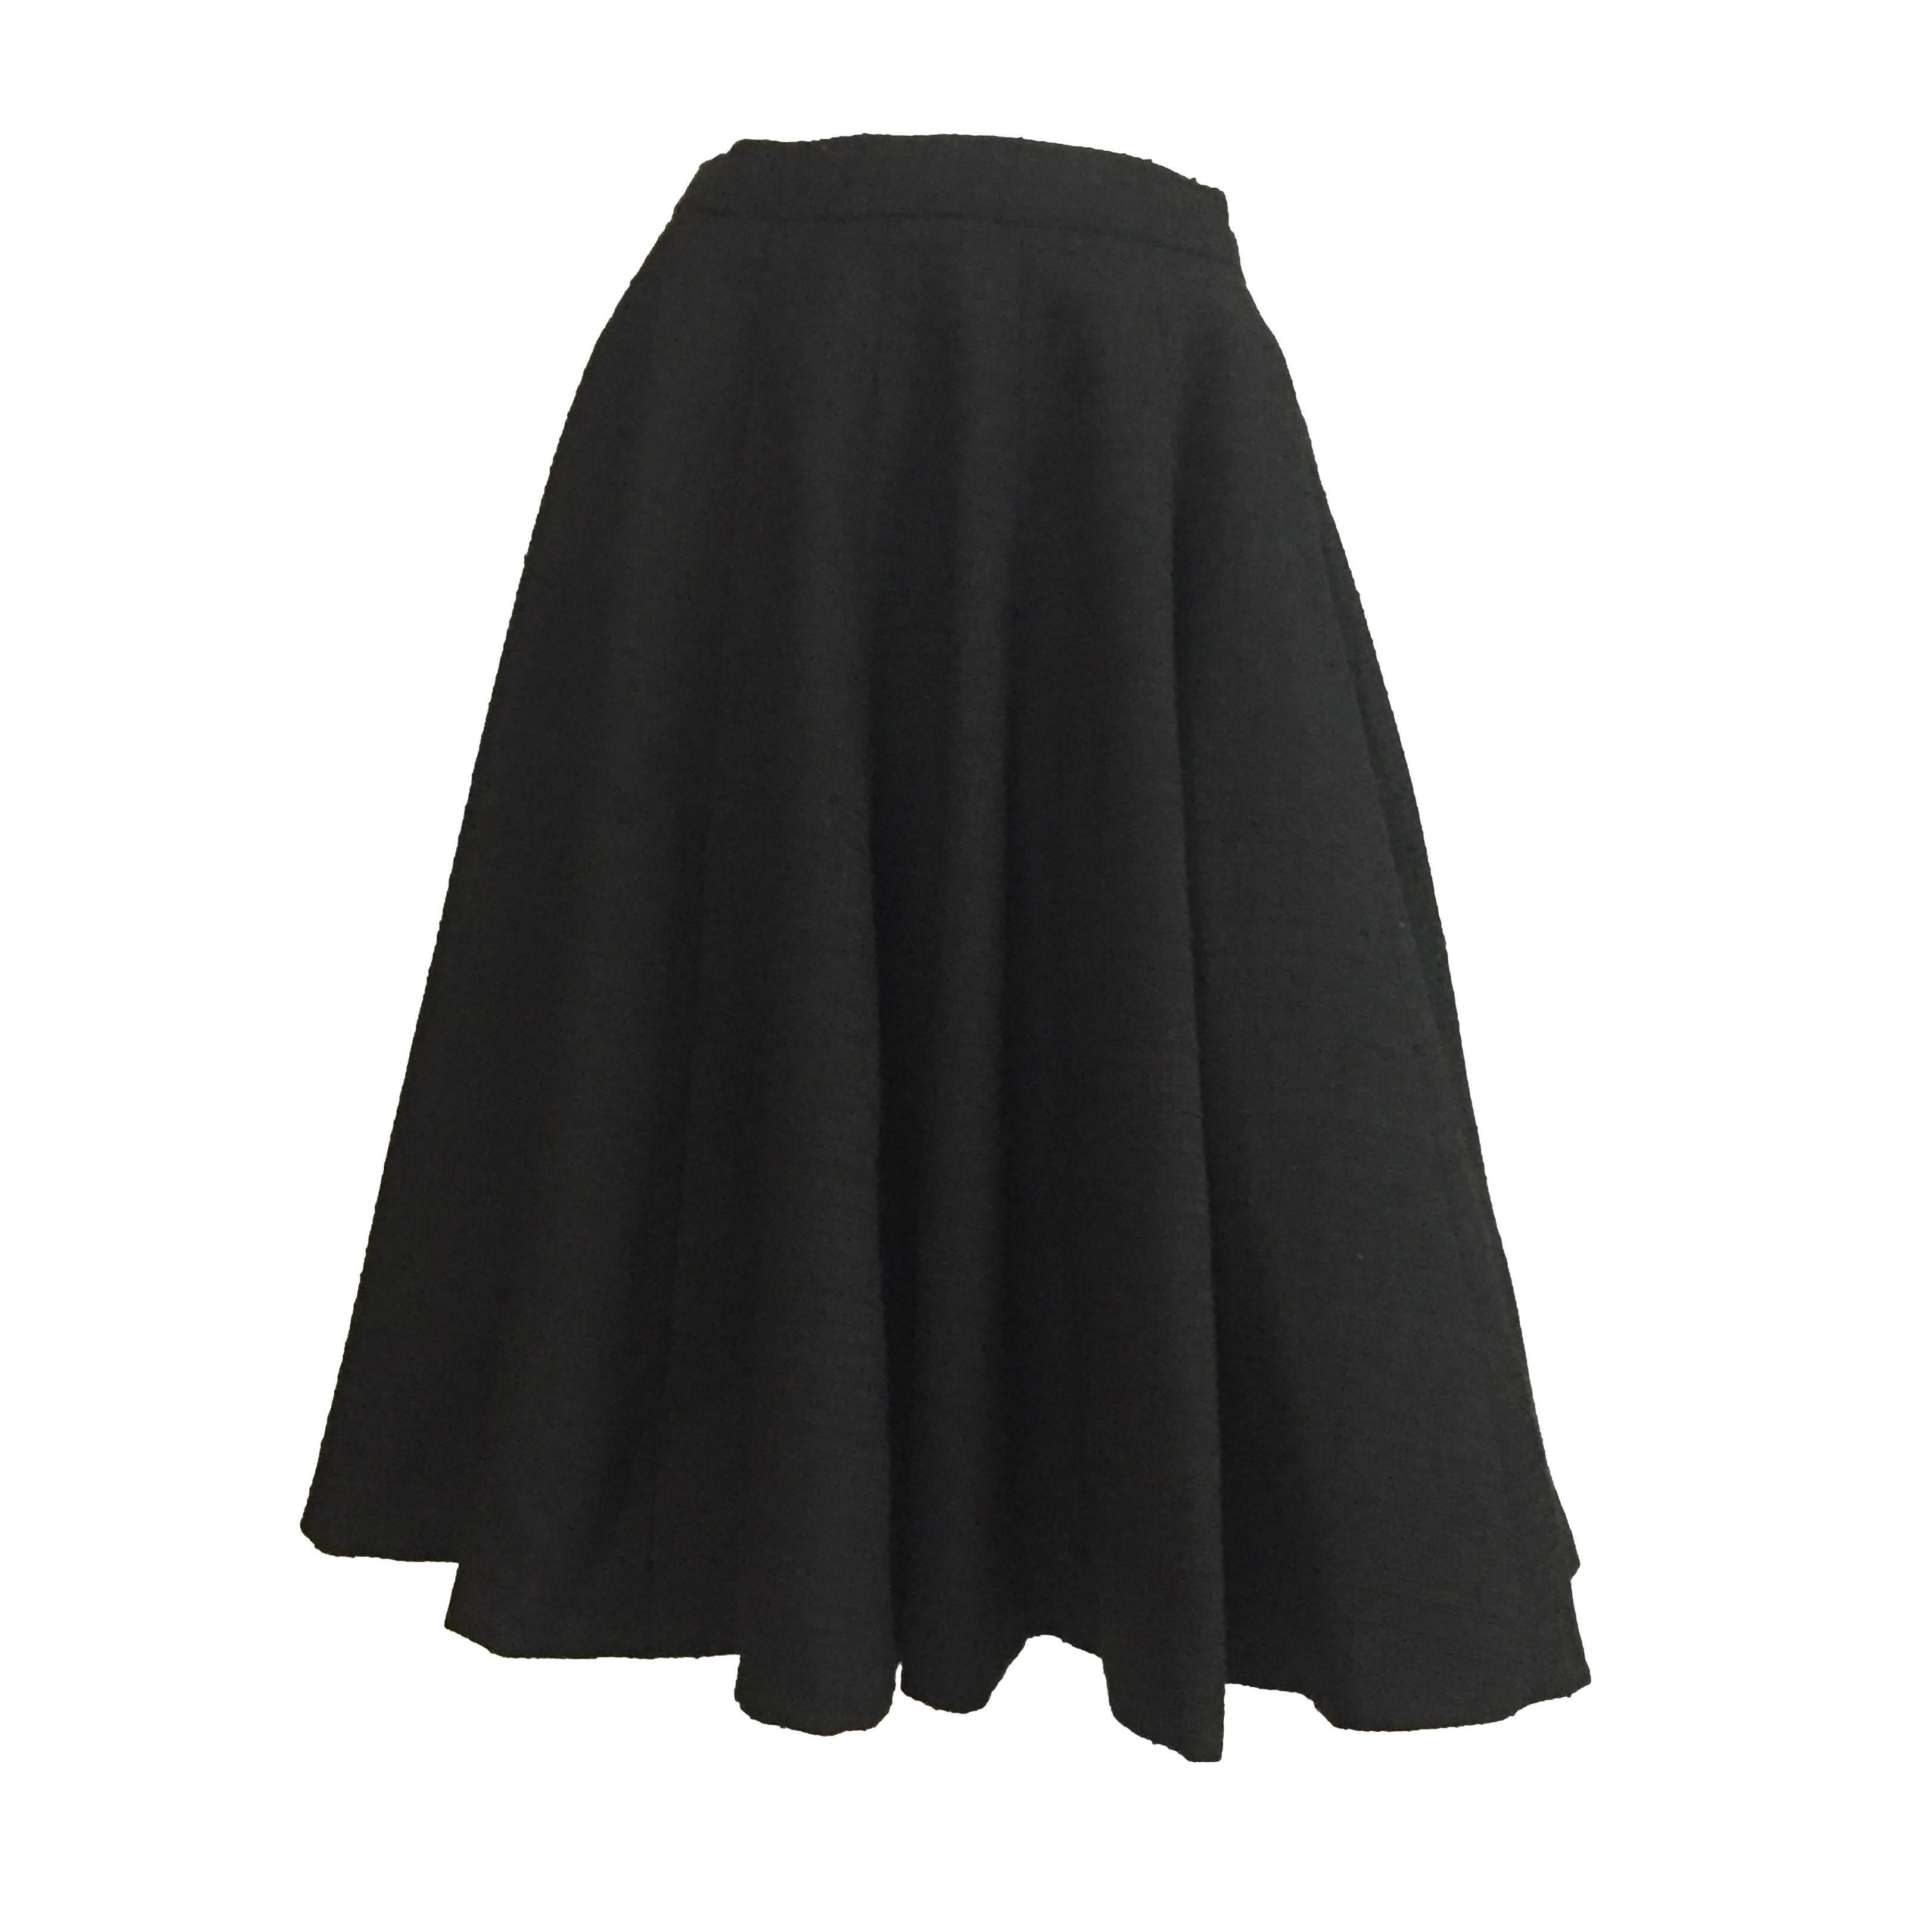 Norman Norell 1957 black wool flare skirt size 6 / 8.  For Sale